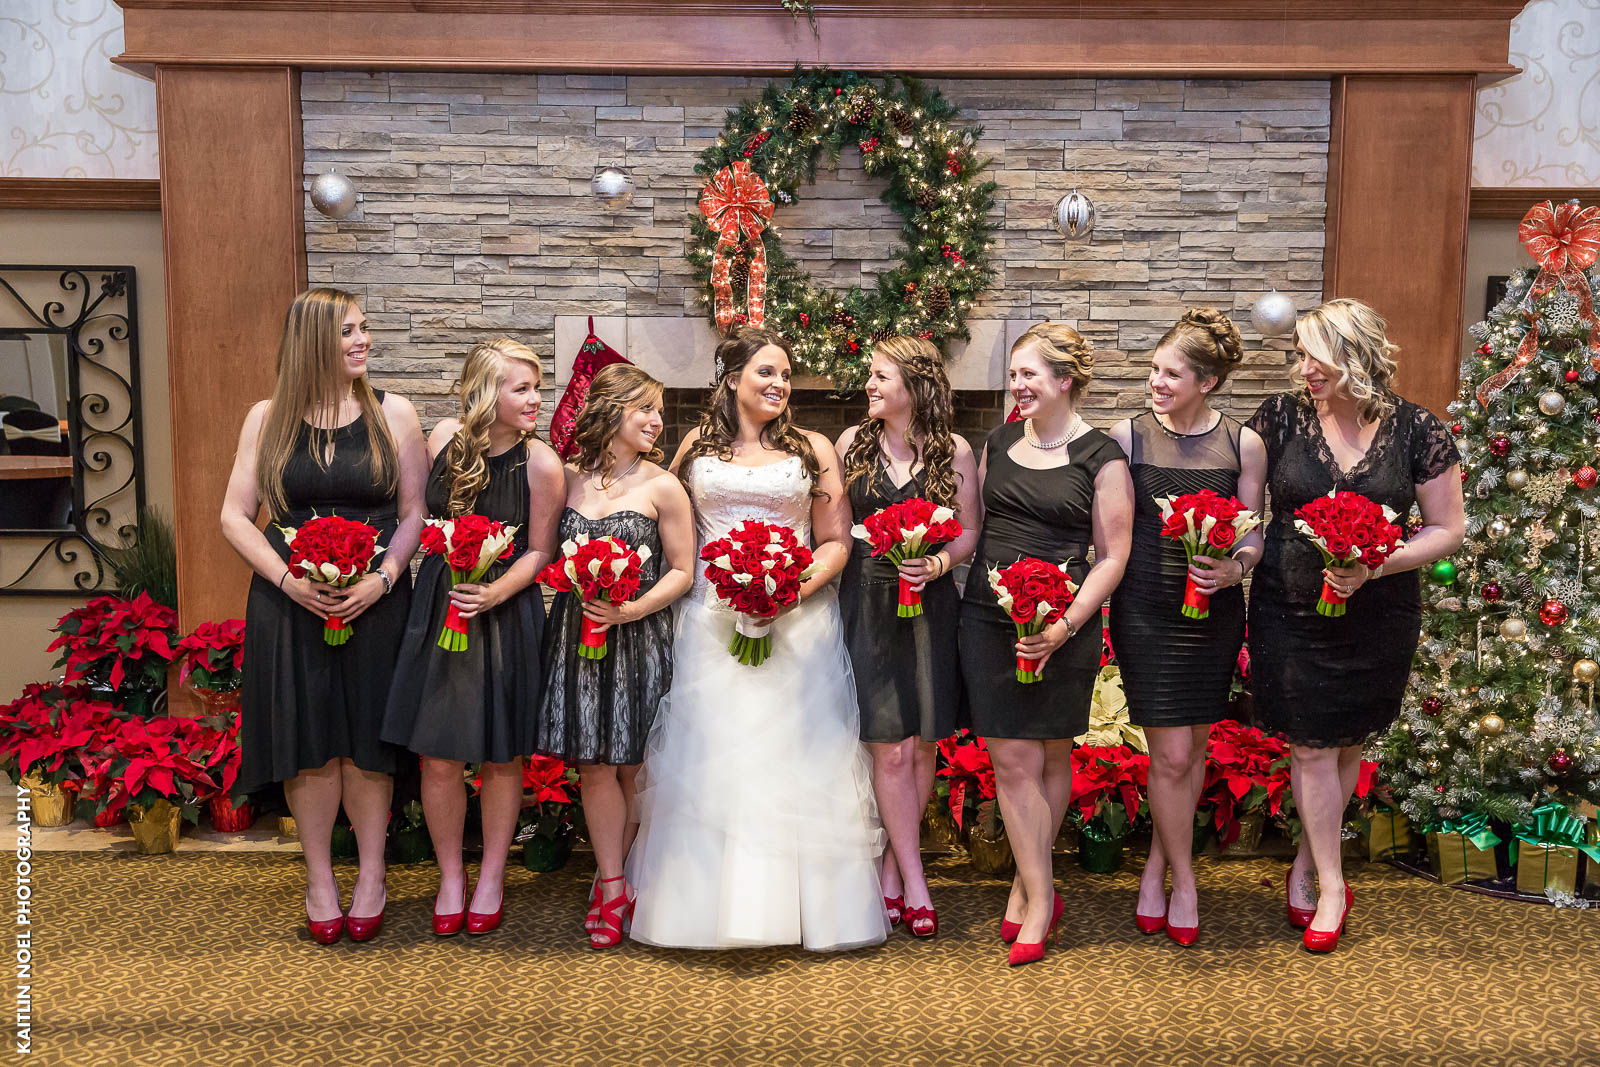 red bridal party dresses